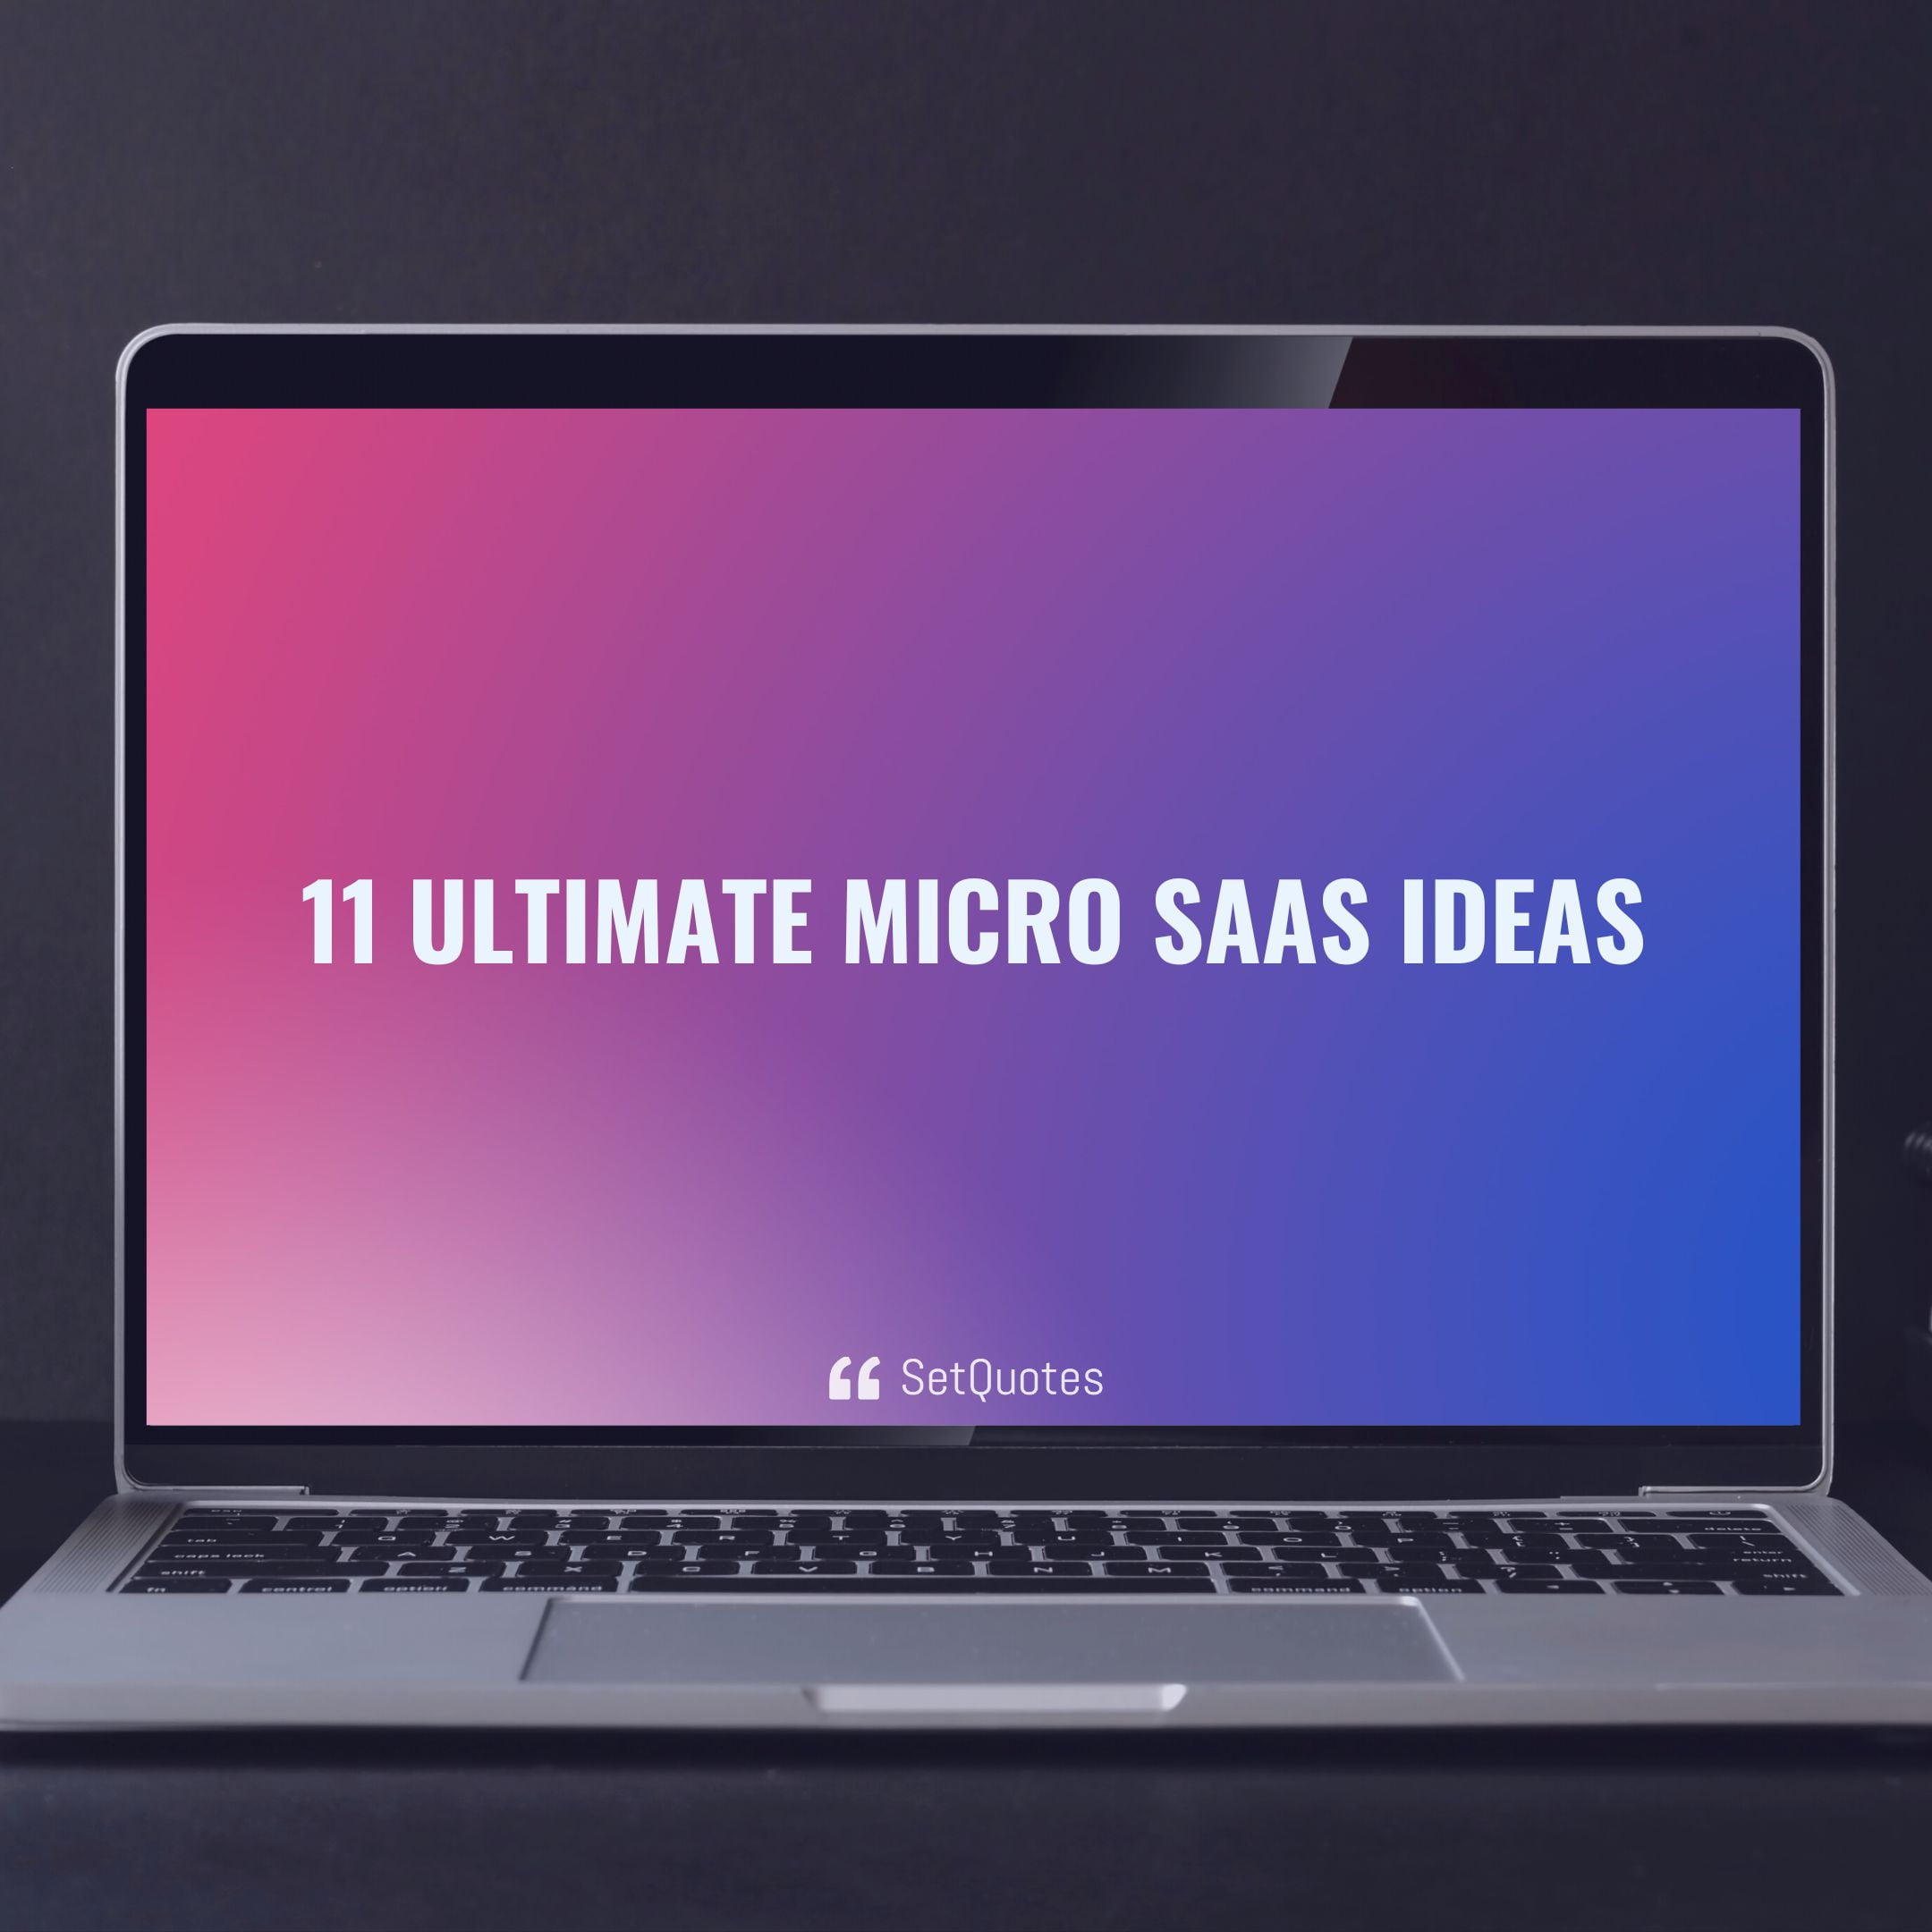 11 Ultimate micro SaaS ideas to launch in 2022 - SetQuotes